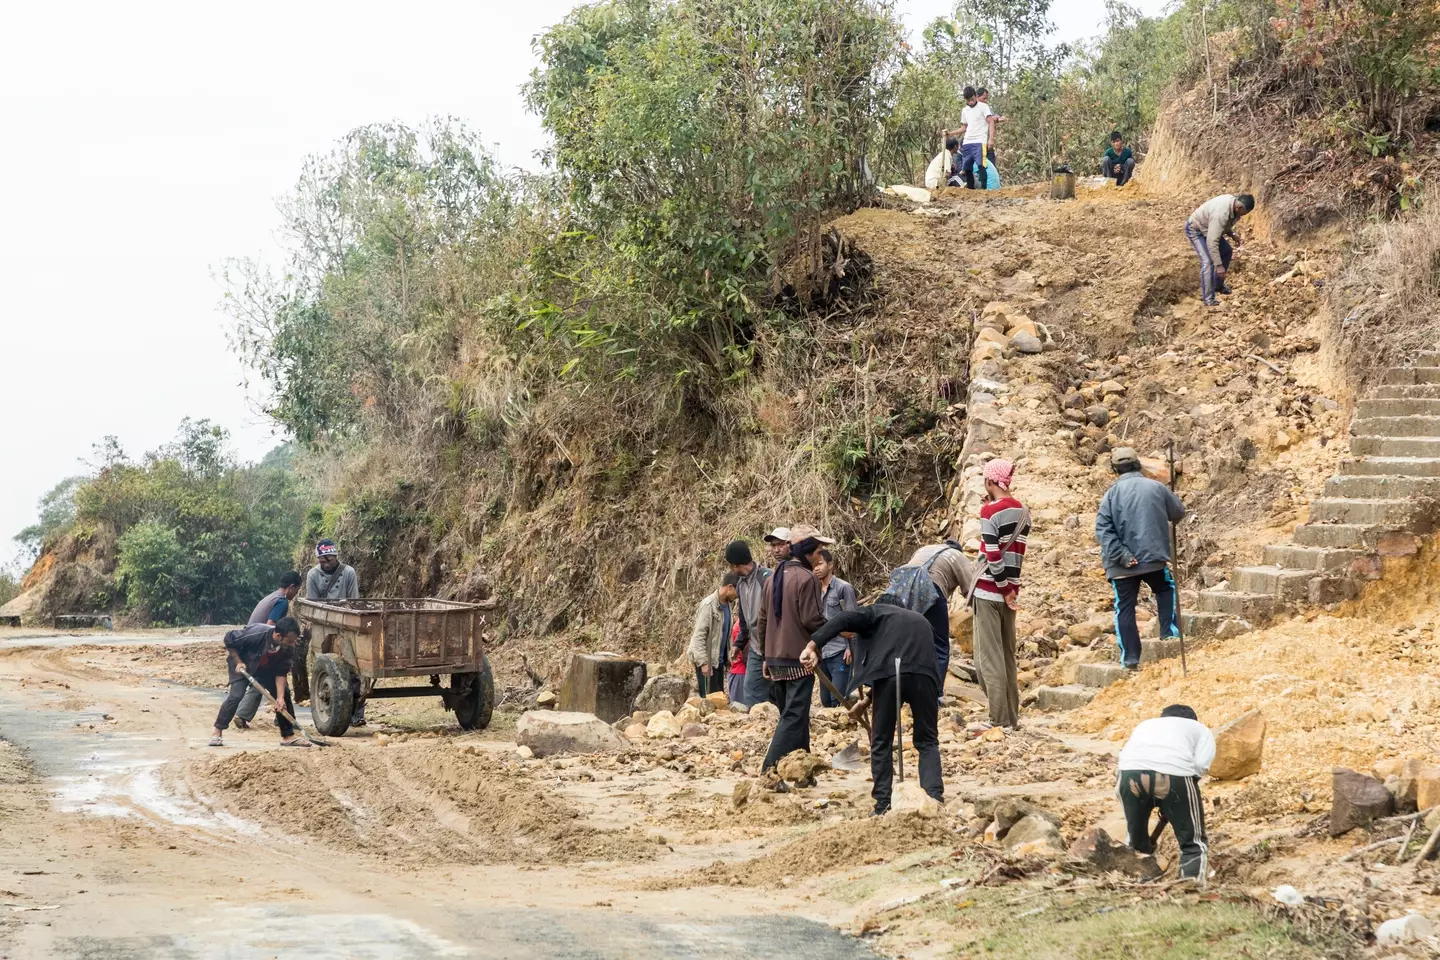 Mawsynram often has to be repaired after torrential monsoon rains due to the damage caused.